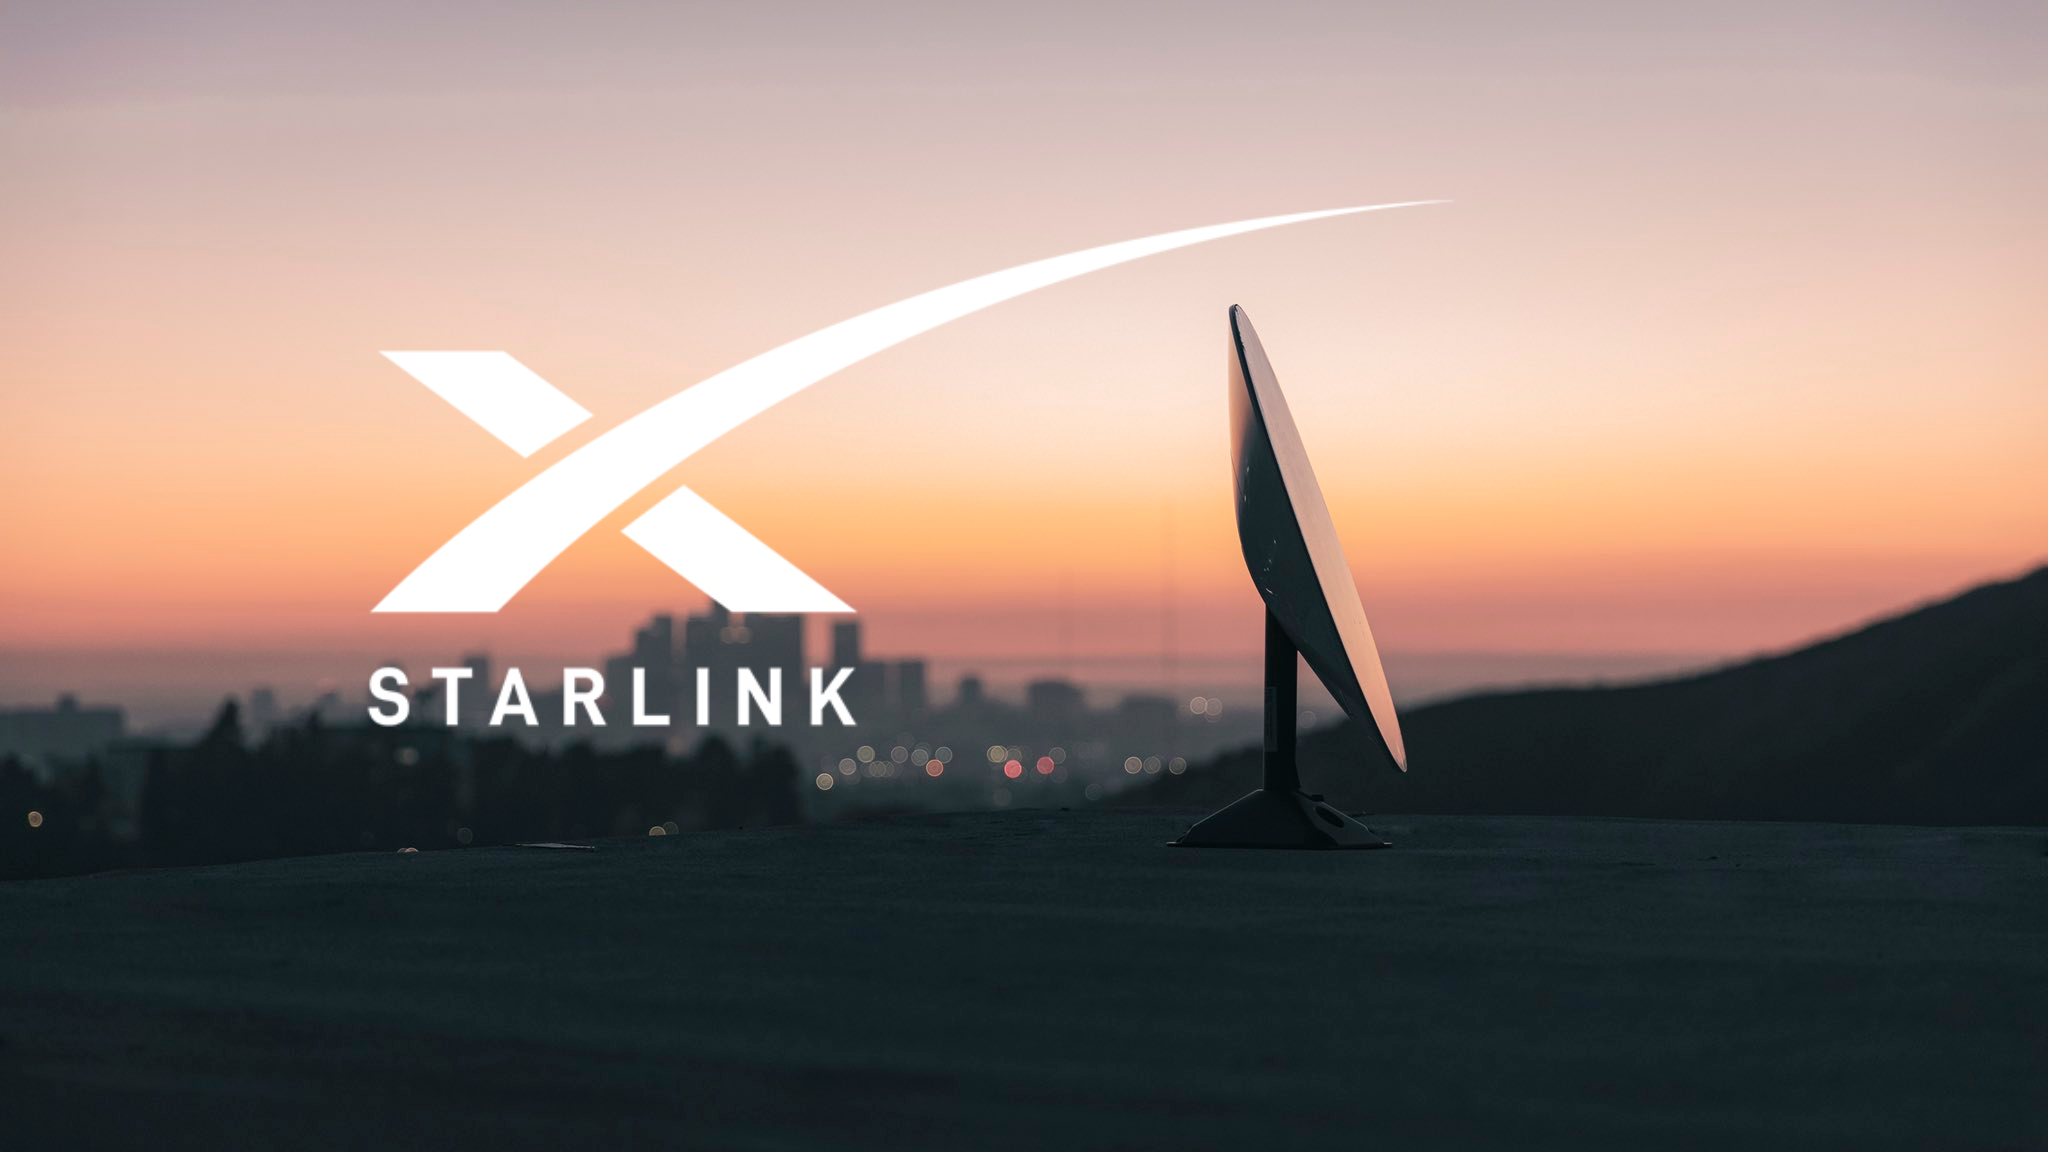 SpaceX submits request to operate 5 million Starlink Terminals due to ‘extraordinary demand’